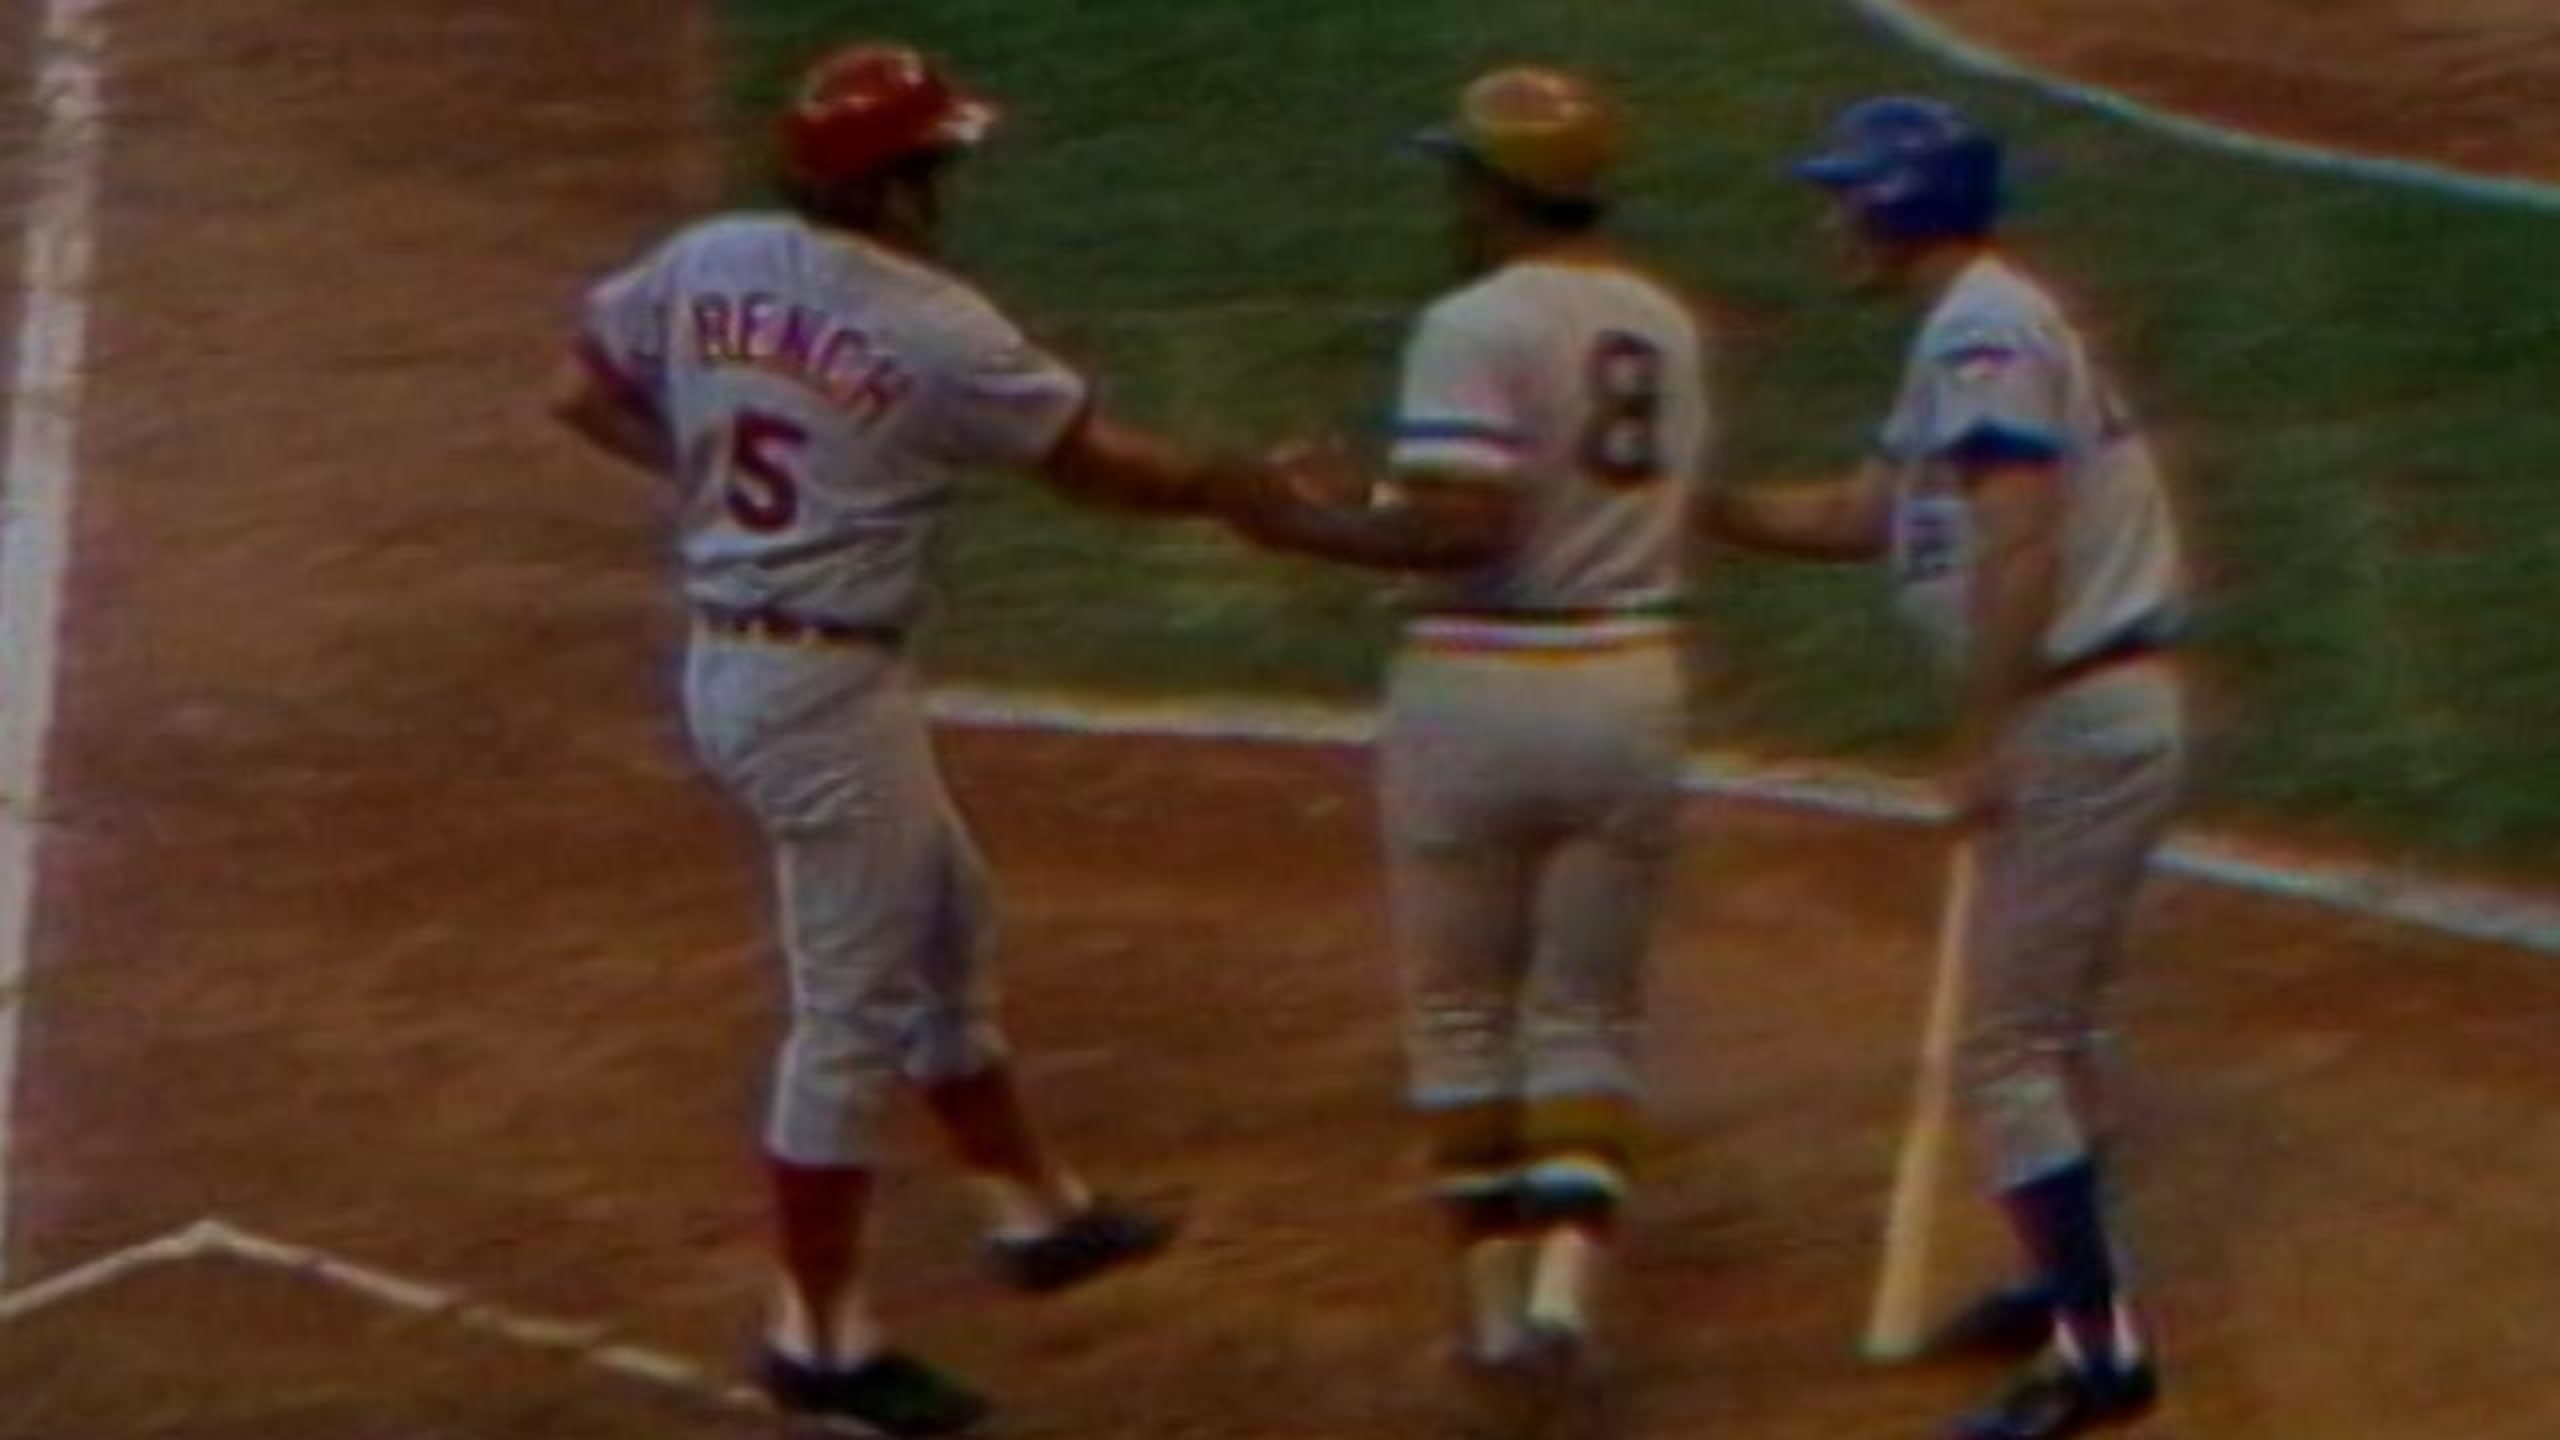 What made MLB's 1971 All-Star Game in Detroit one of the best ever